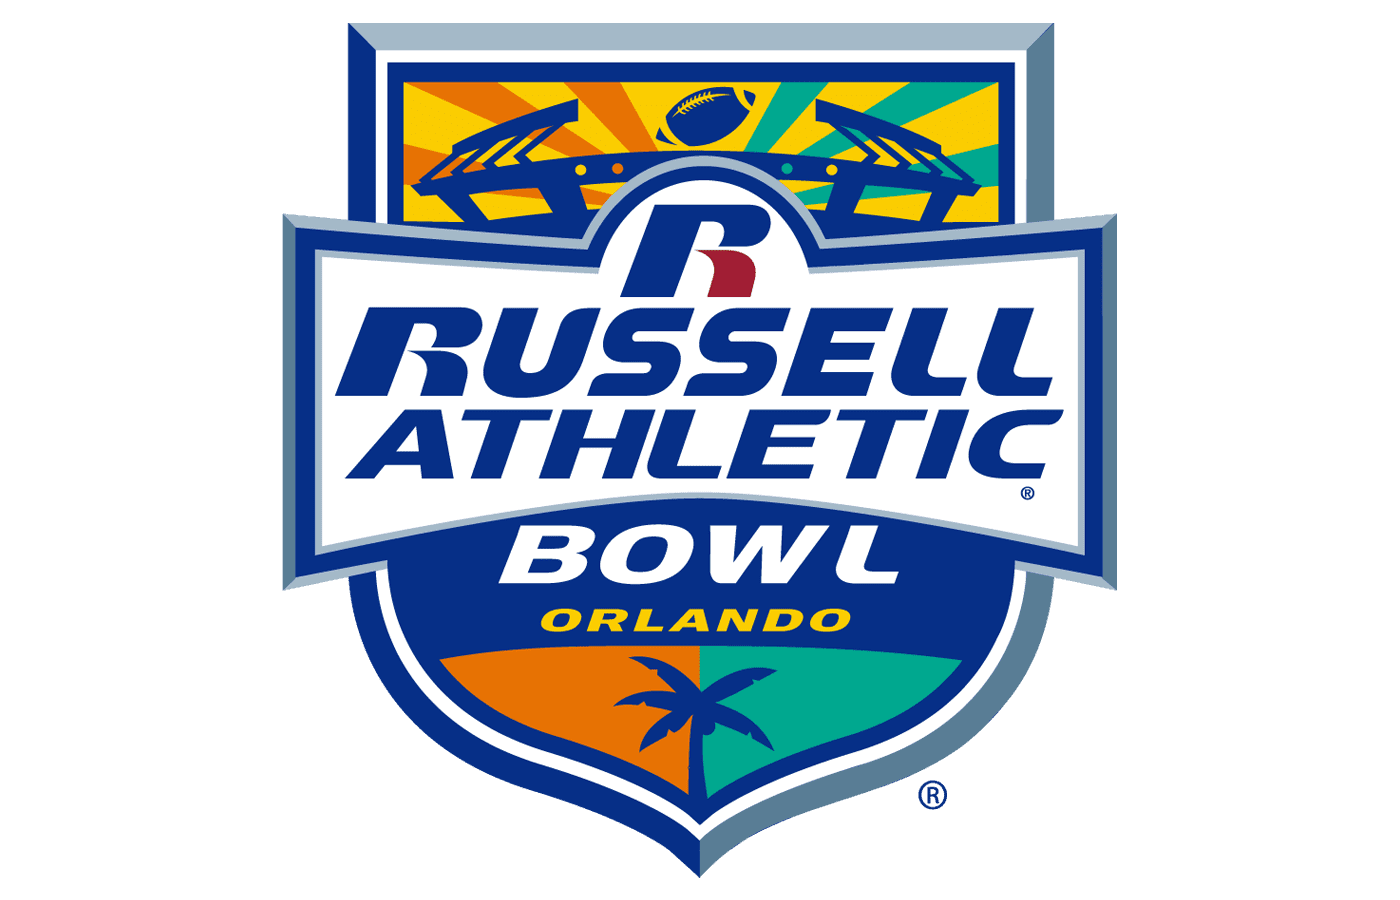 Russell Athletic Bowl Logo and symbol, meaning, history, PNG, brand